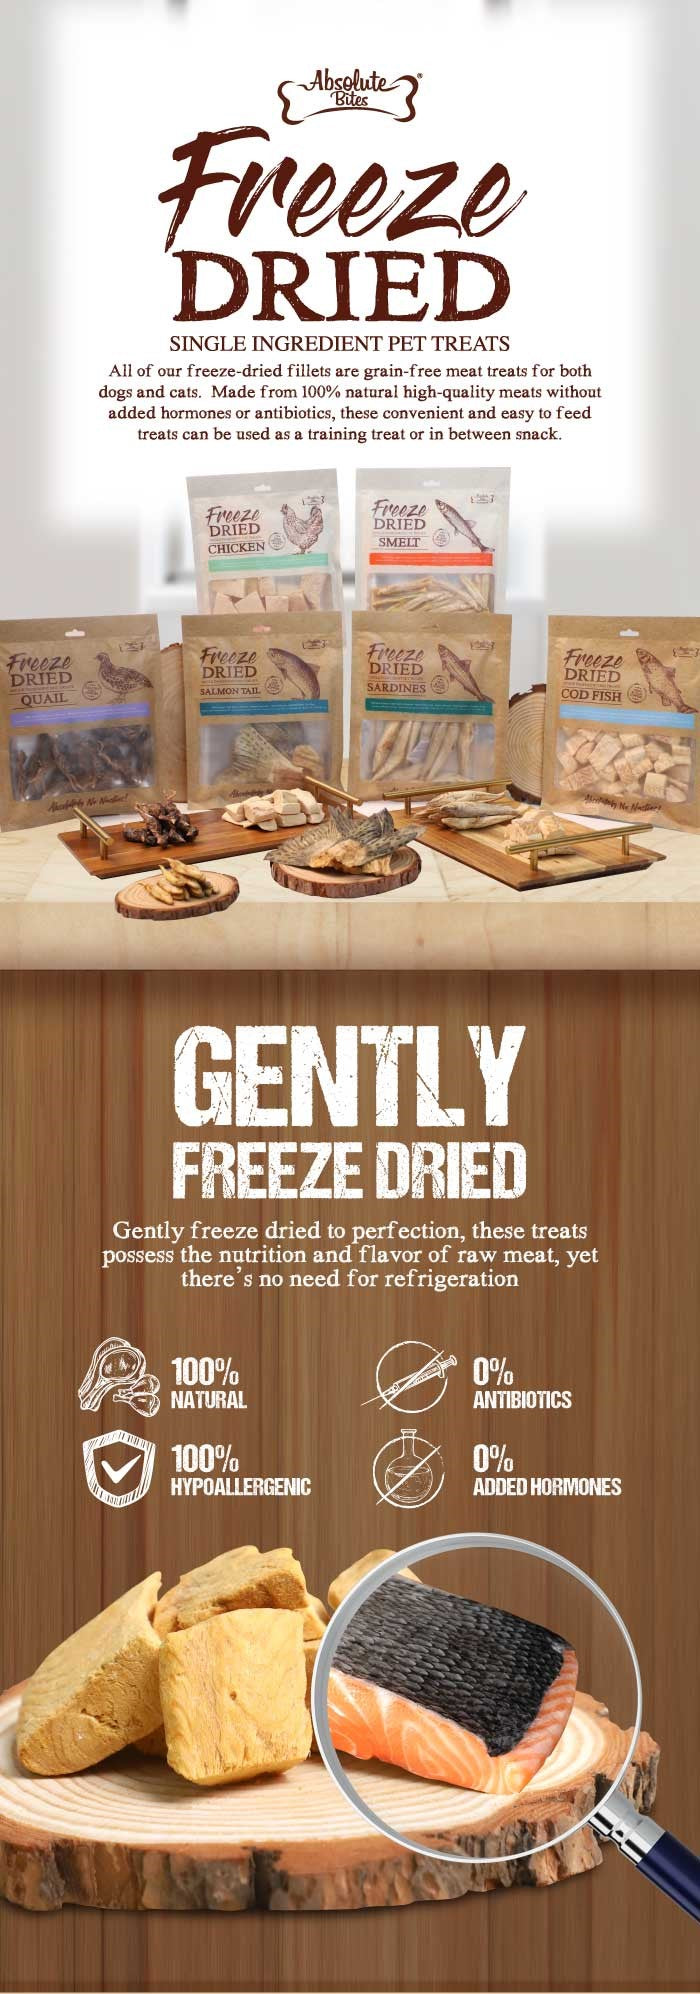 Absolute Bites Single Ingredient Freeze Dried Dog Treats - Squid (40g)